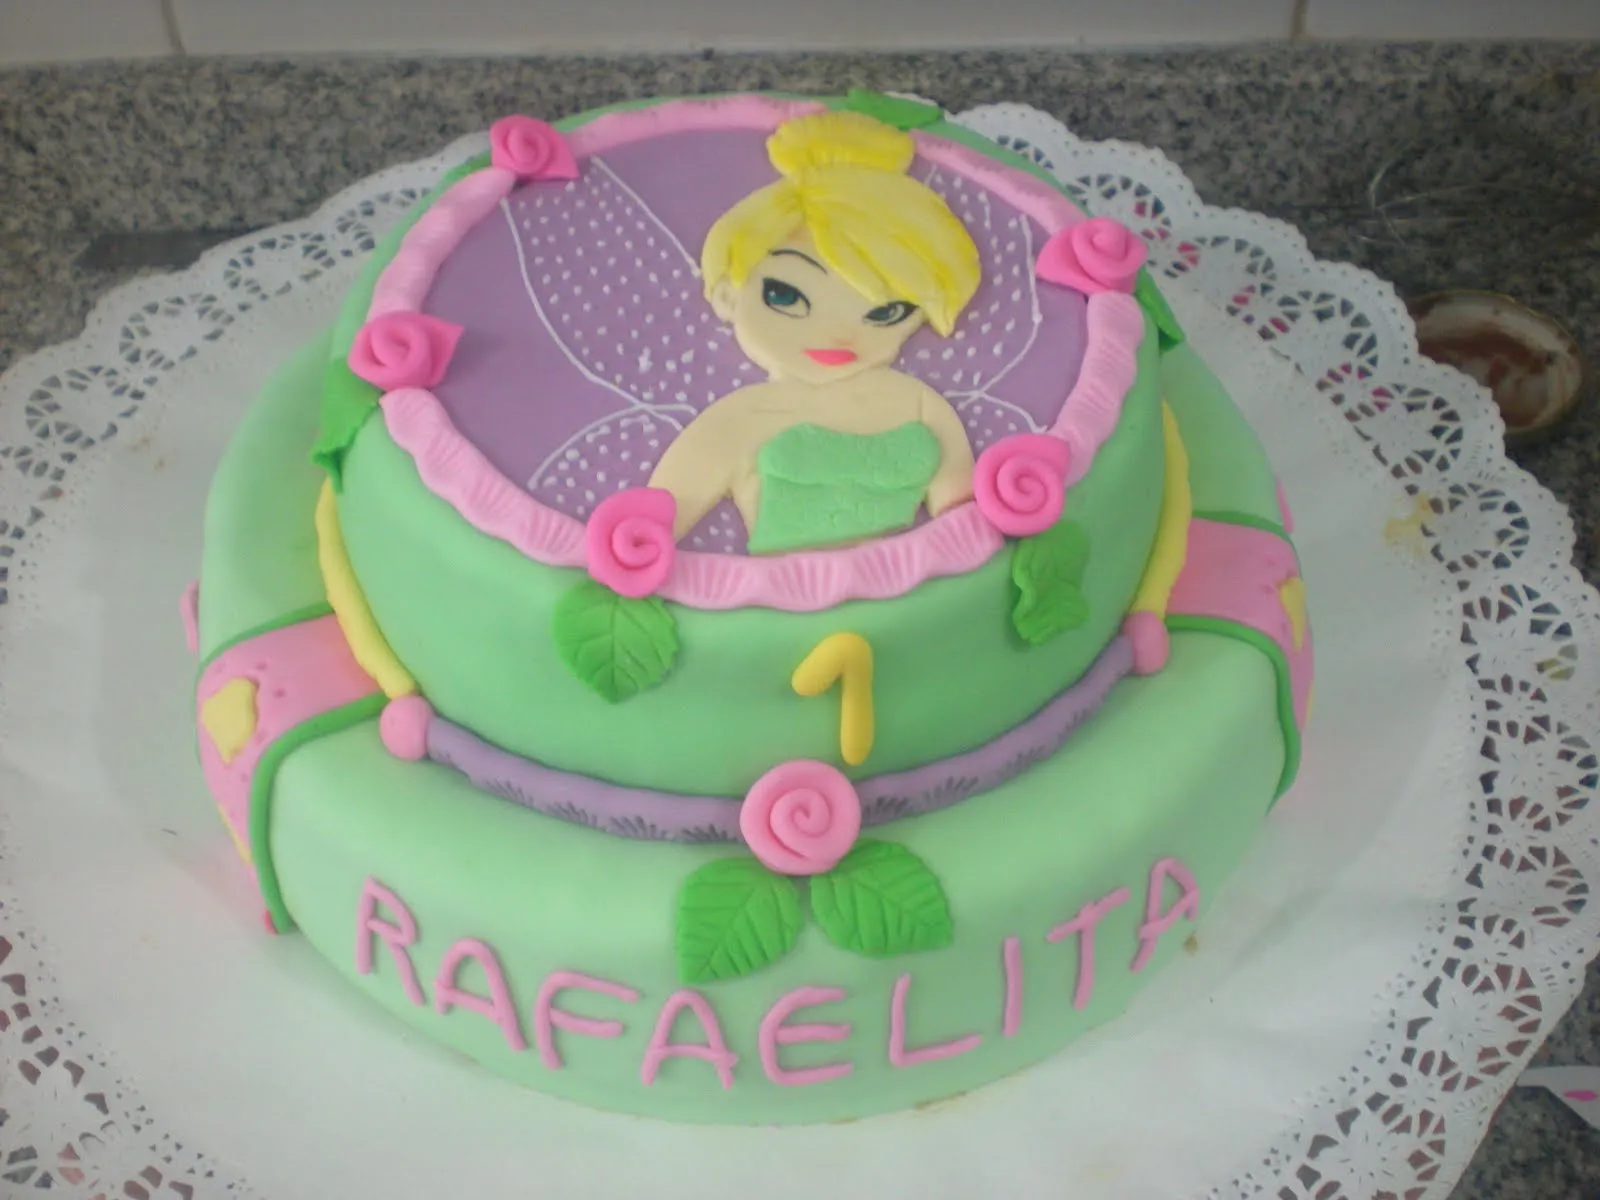 Torta flores con tinkerbell - Imagui